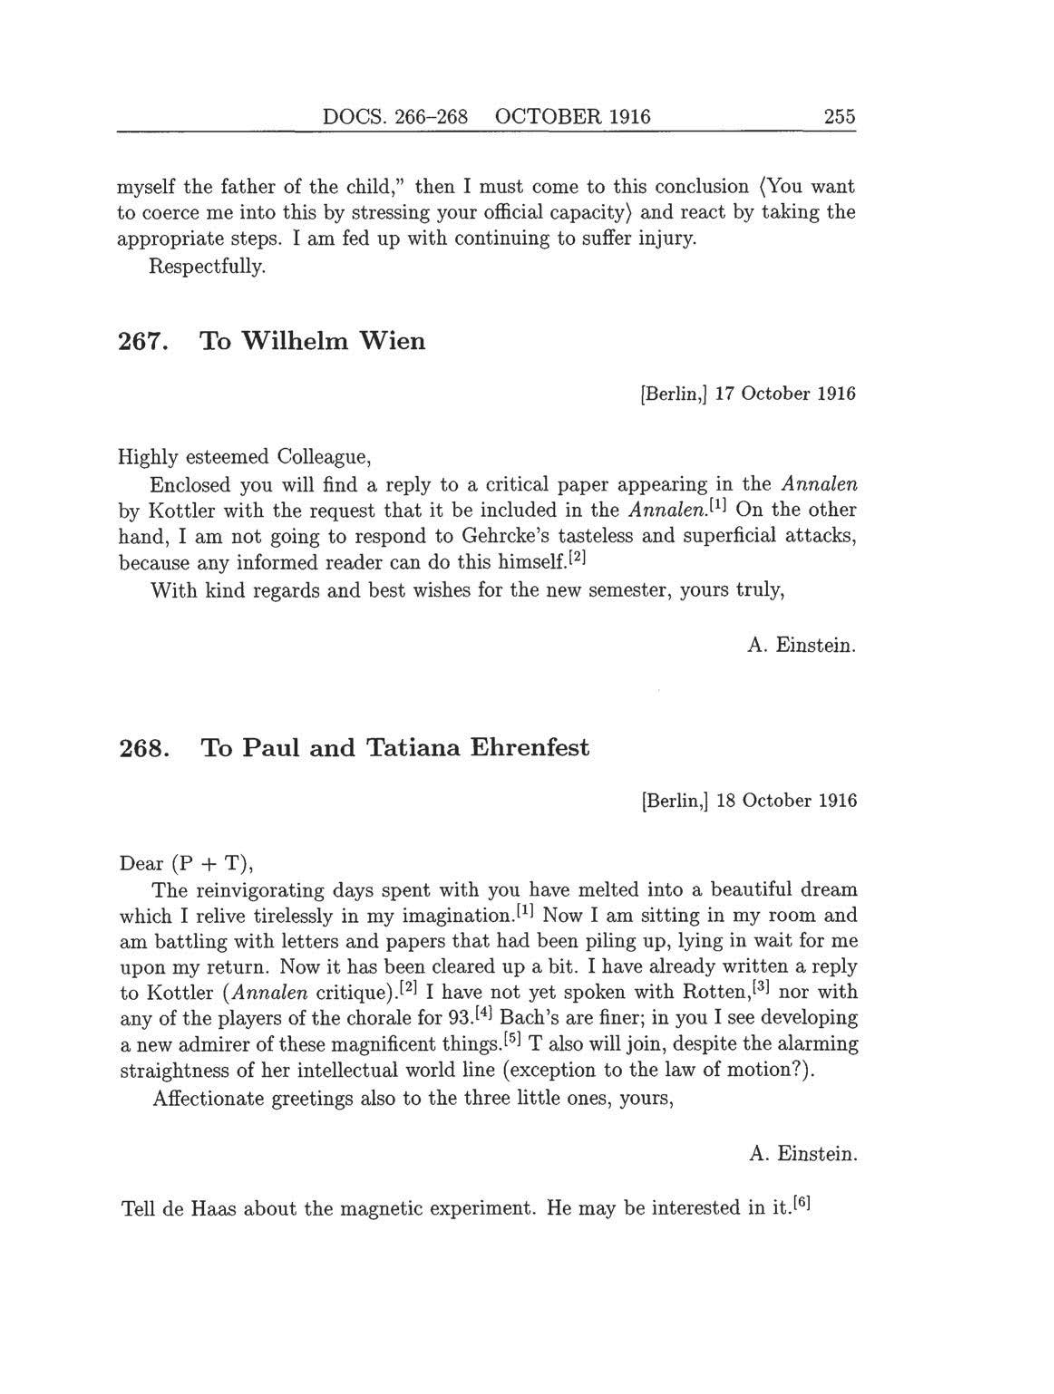 Volume 8: The Berlin Years: Correspondence, 1914-1918 (English translation supplement) page 255